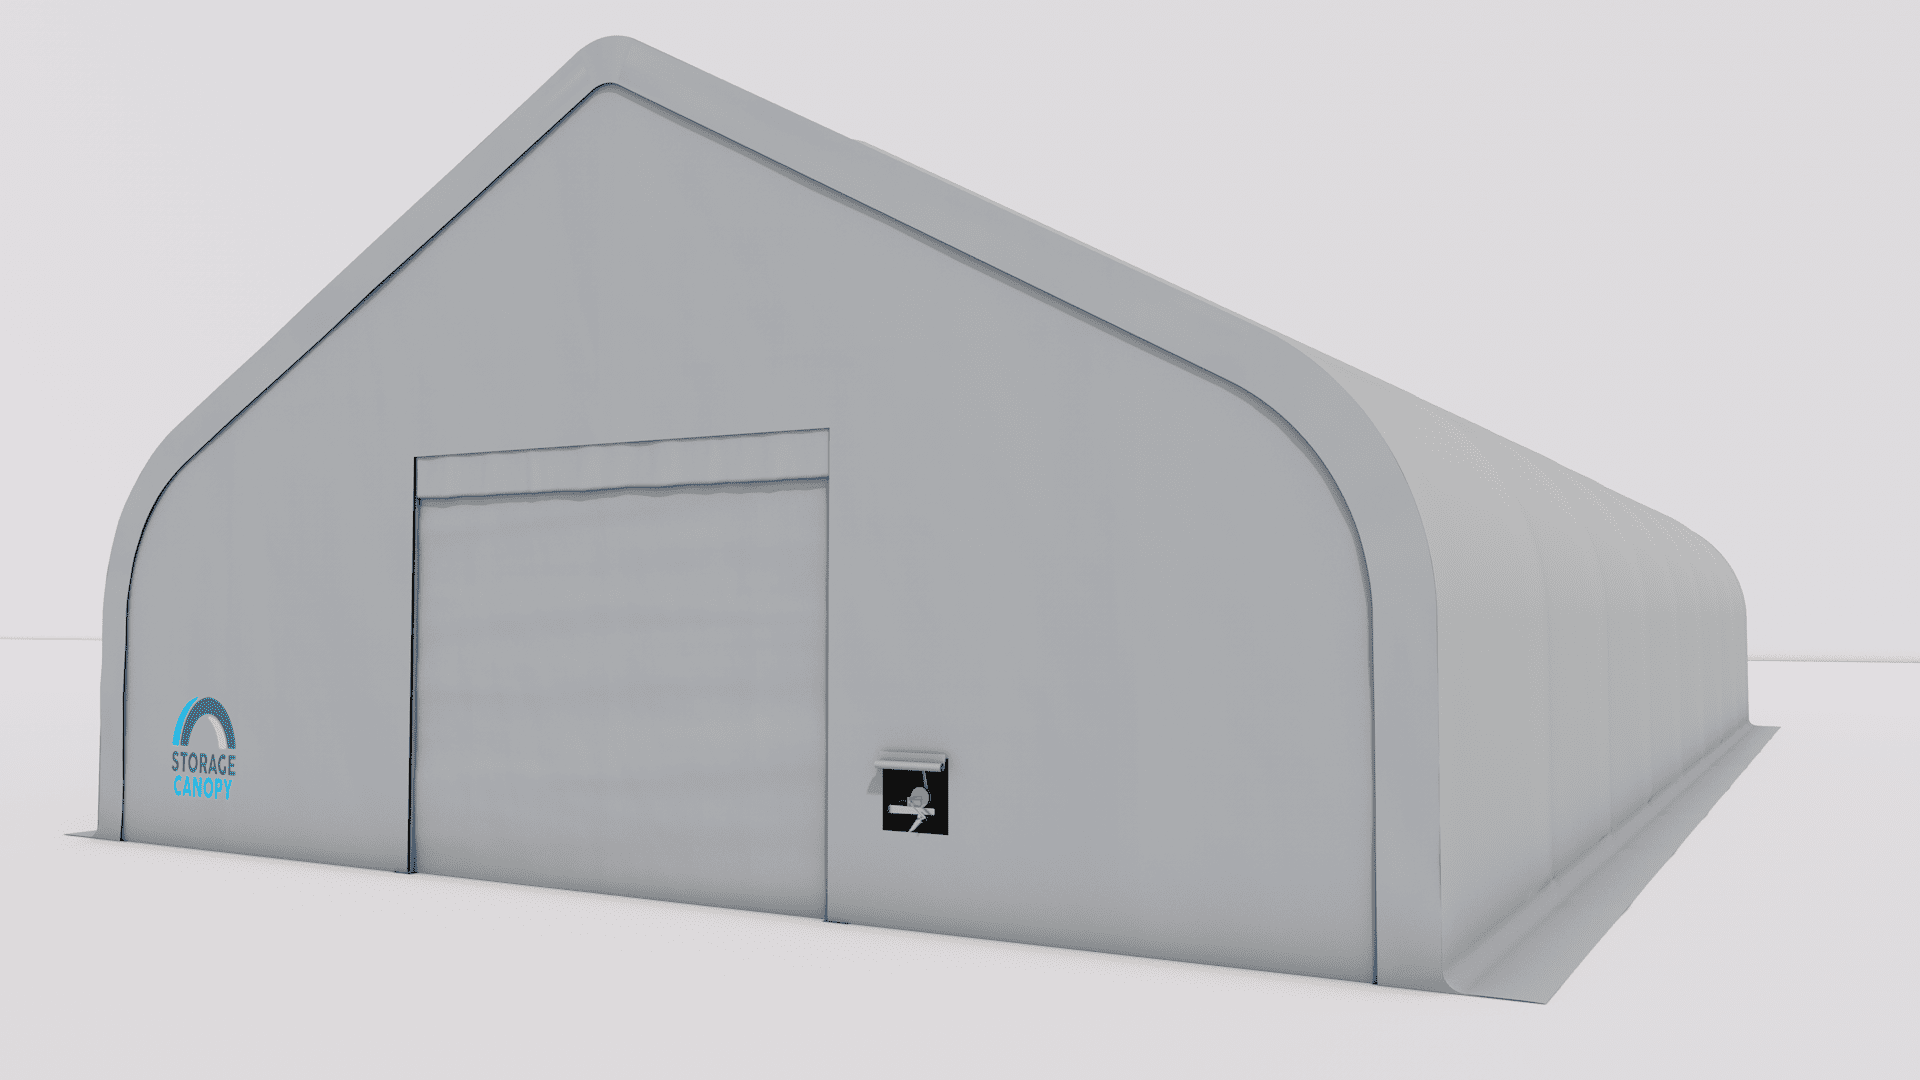 fabric building 40W 80L 21H - persp right closed grey